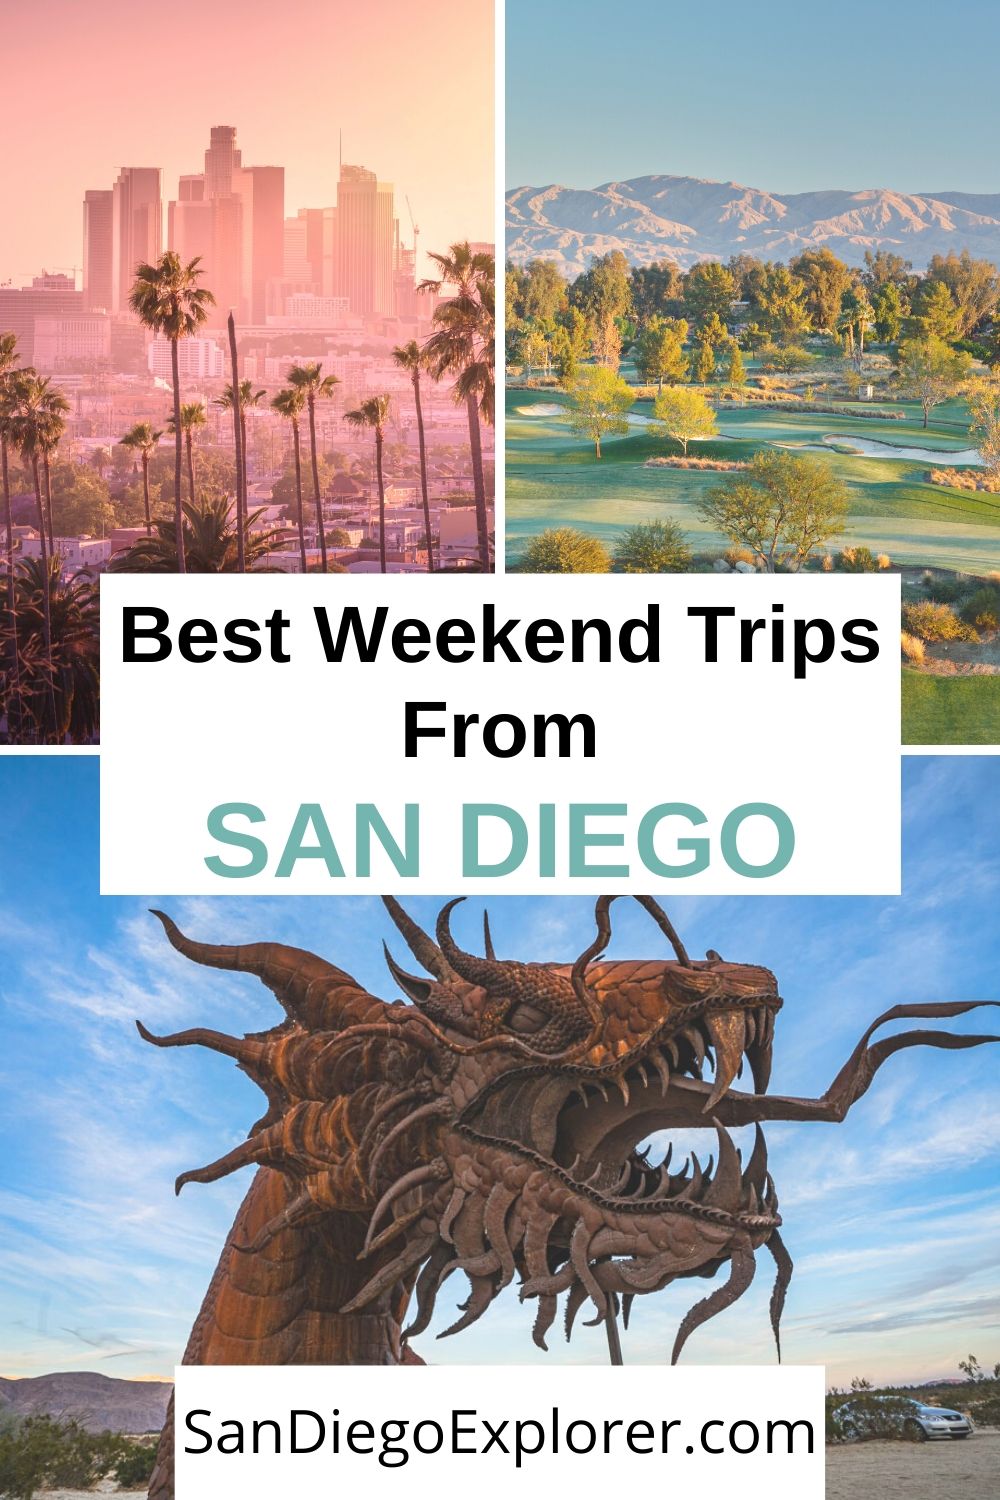 8 Best Weekend Trips From San Diego You MUST Do!